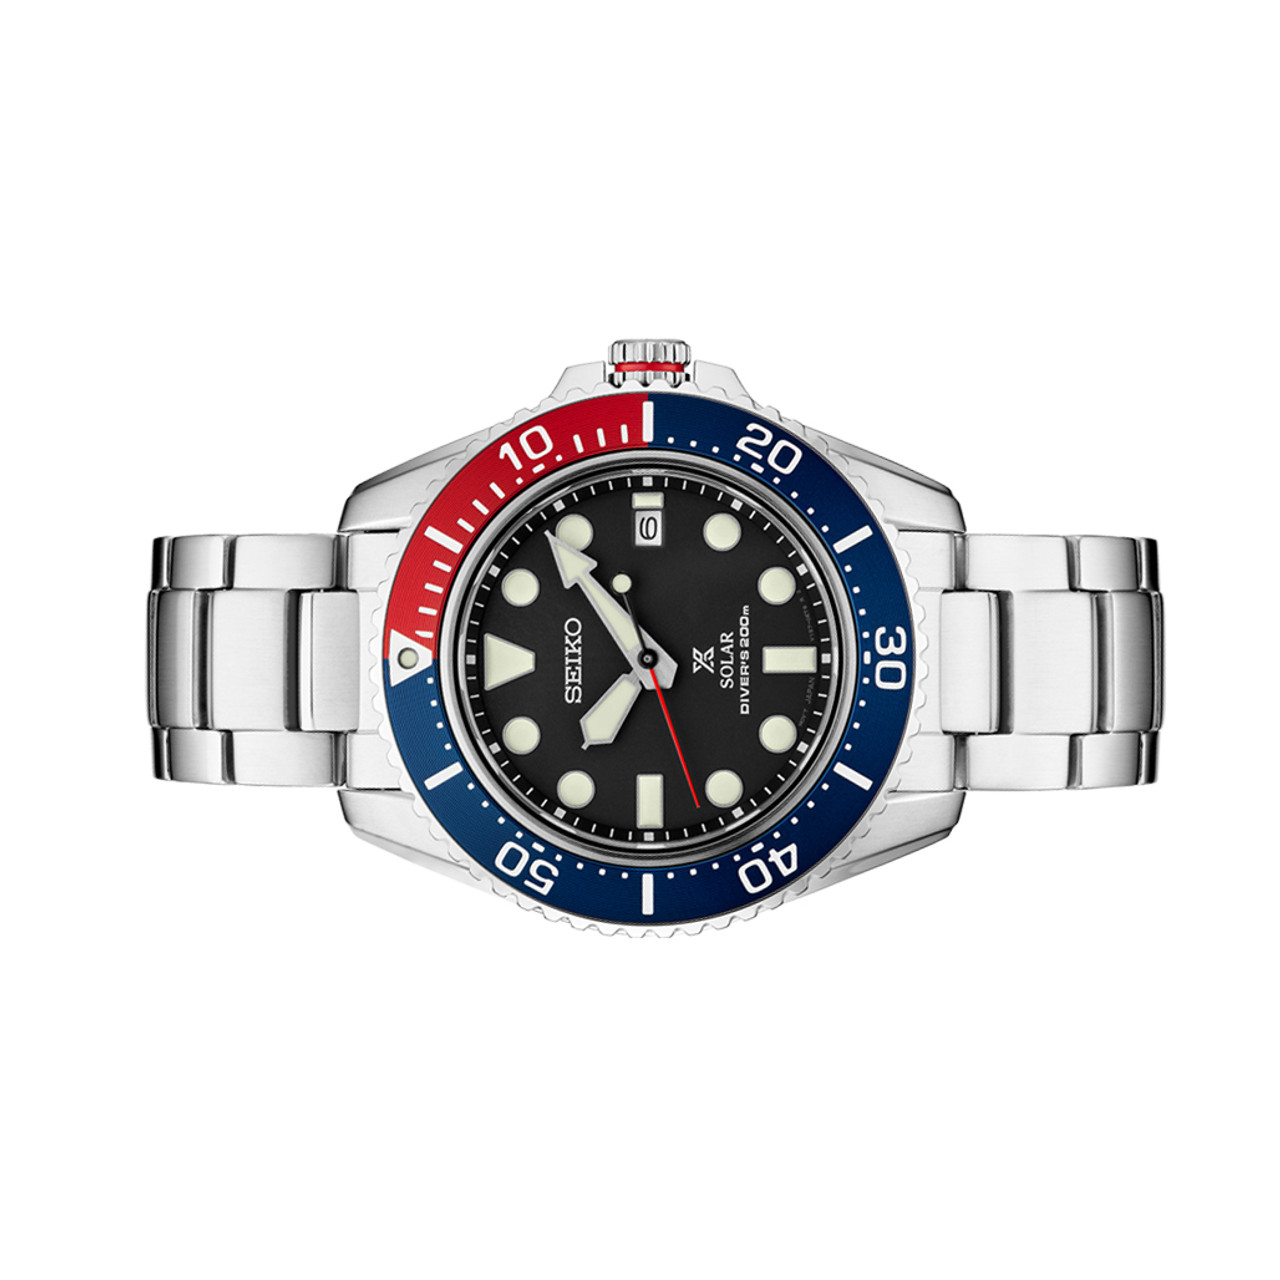 Seiko Prospex Solar Dive Watch with Sapphire Crystal, Pepsi Bezel and Black  Dial #SNE591